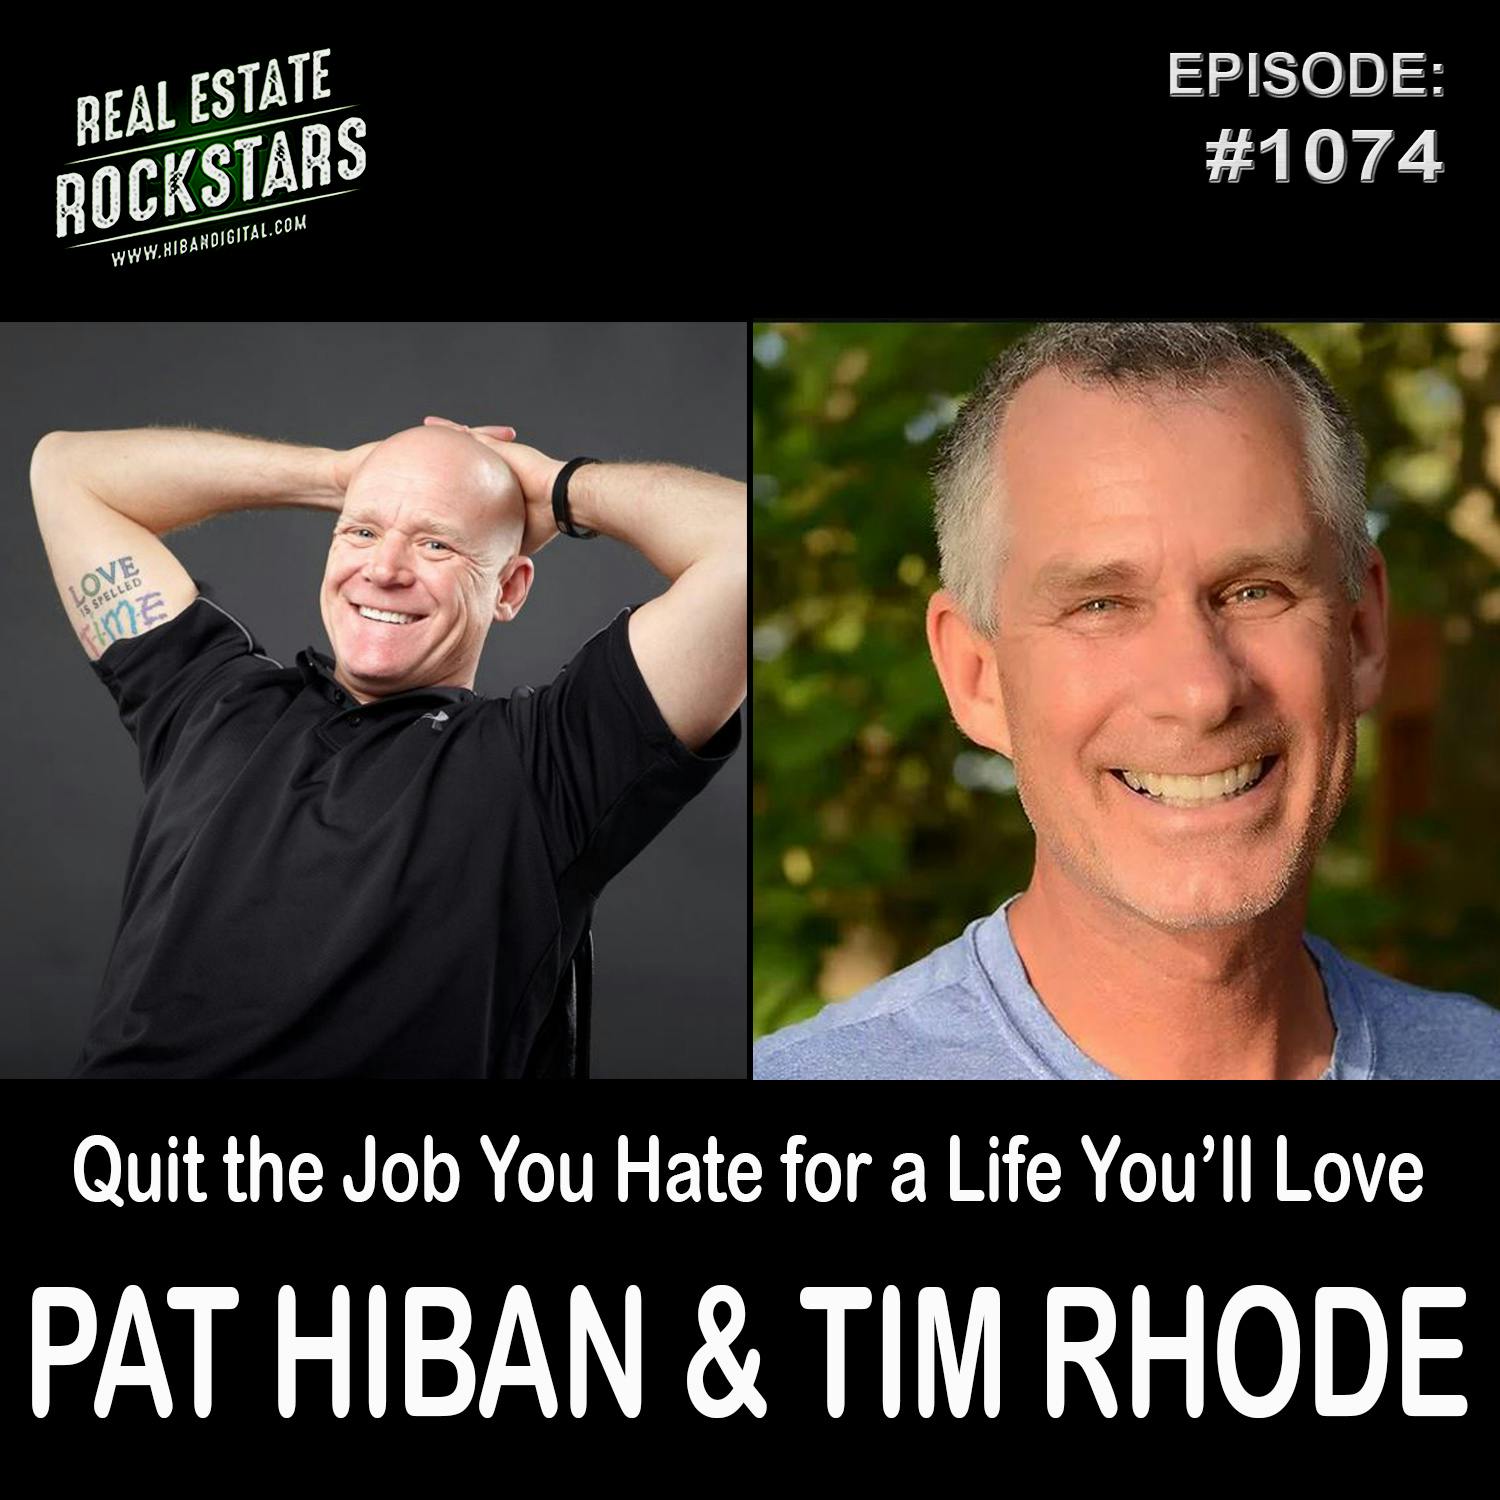 1074: Quit the Job You Hate for a Life You’ll Love – Pat Hiban and Tim Rhode